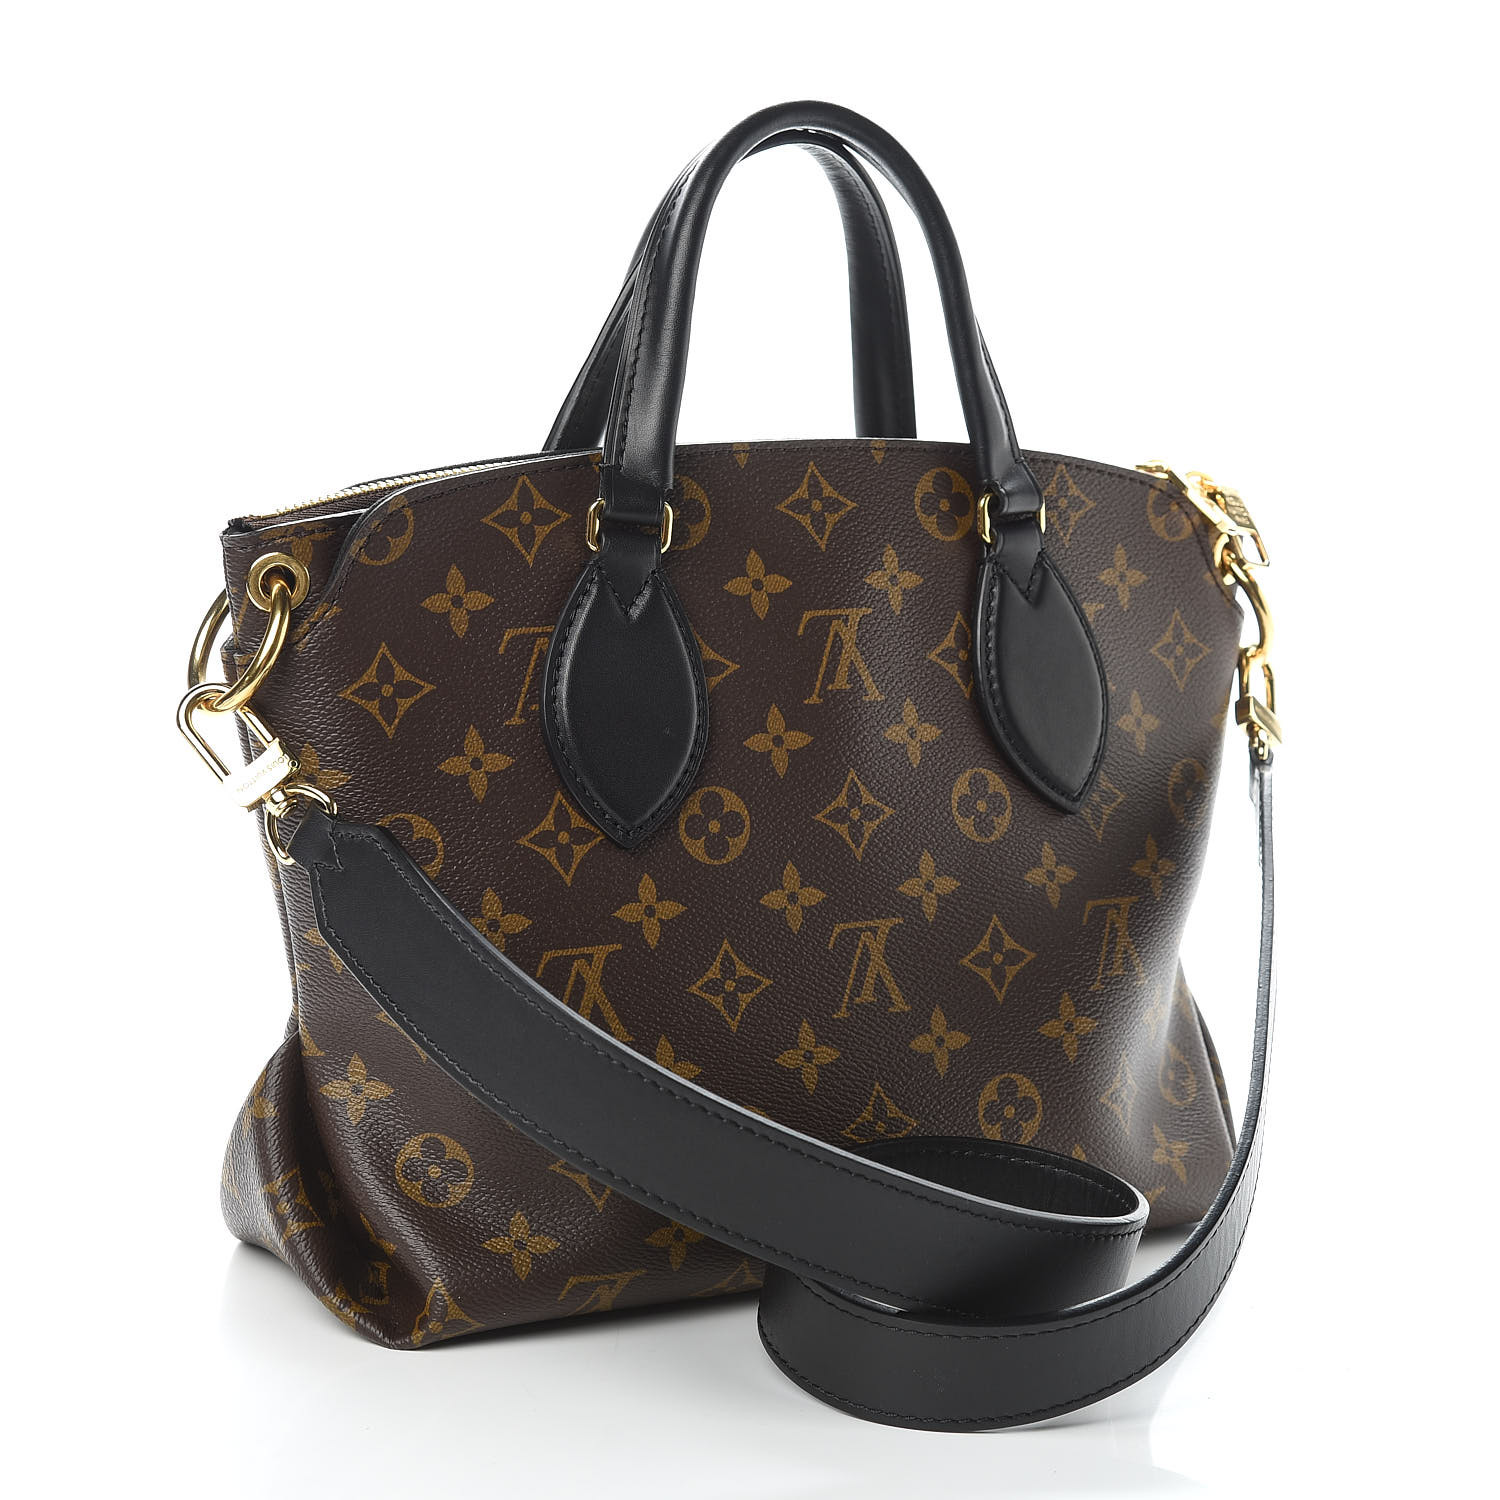 Louis Vuitton Flower Tote Discontinued | IQS Executive